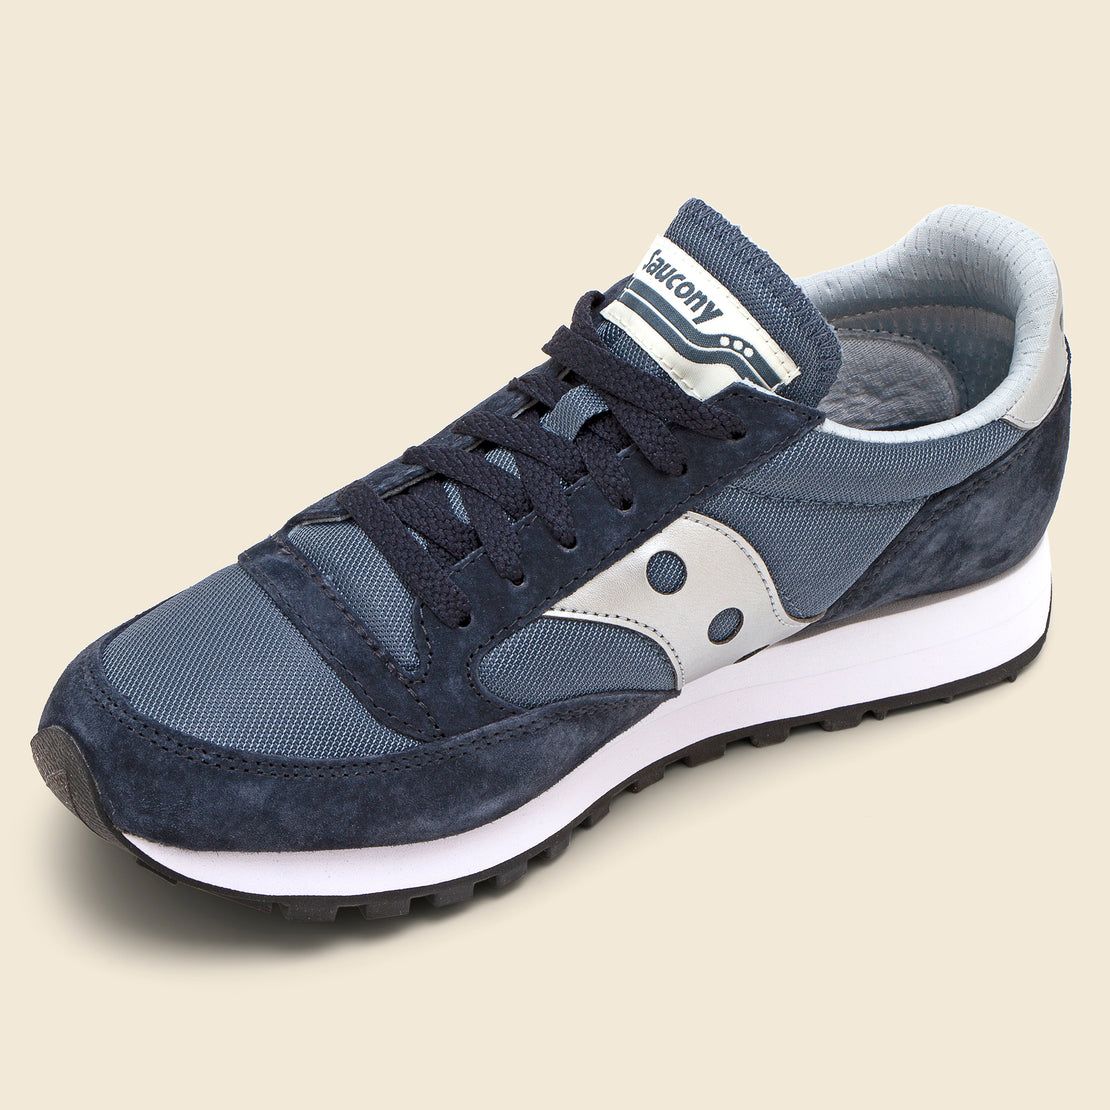 Jazz 81 Sneaker - Navy/Silver - Saucony - STAG Provisions - Shoes - Athletic